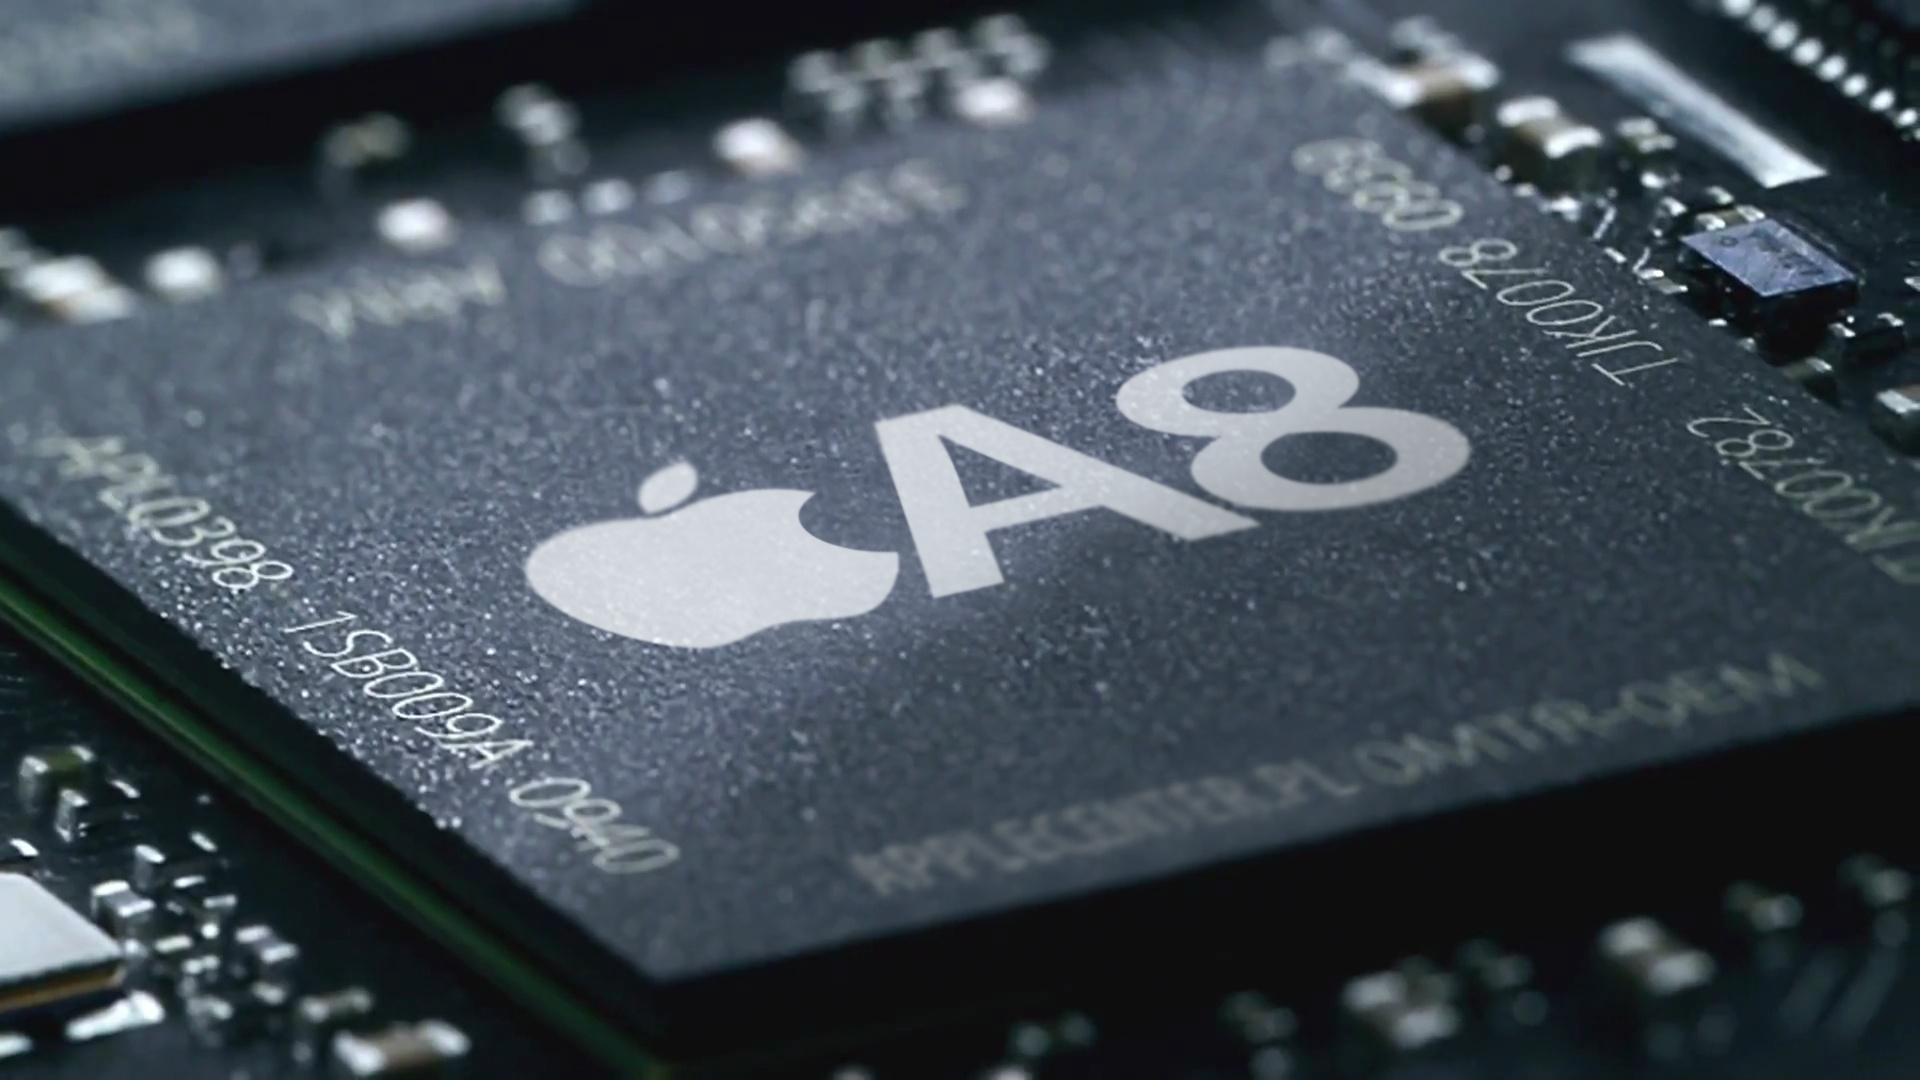 Apple Says $506M Judgement Against It For Patent infringement Was ‘Fraught With Error’